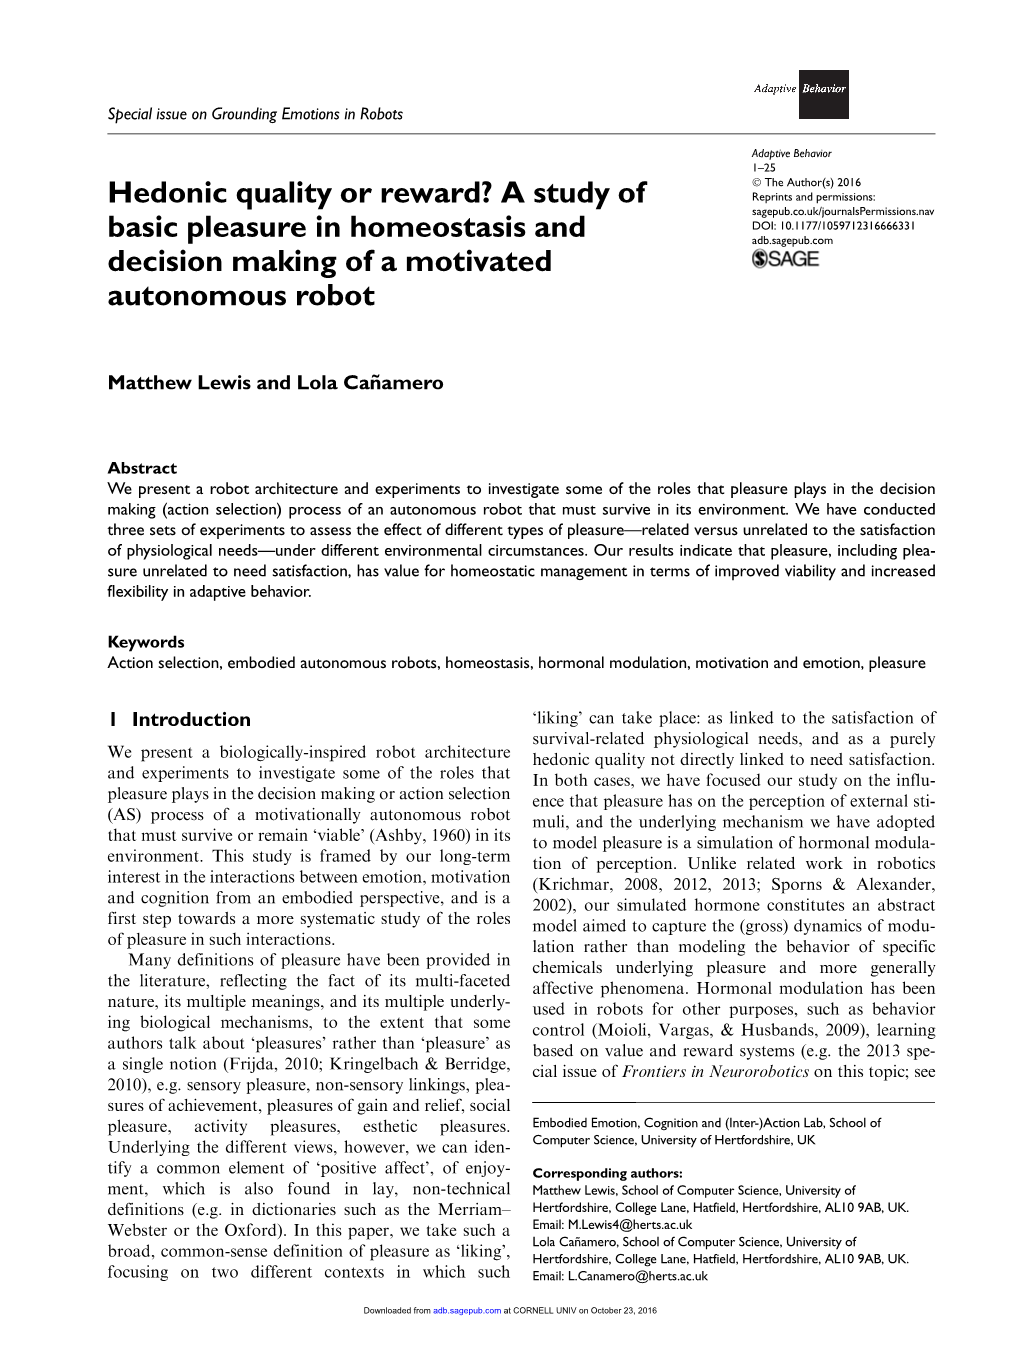 Hedonic Quality Or Reward? a Study of Basic Pleasure in Homeostasis And